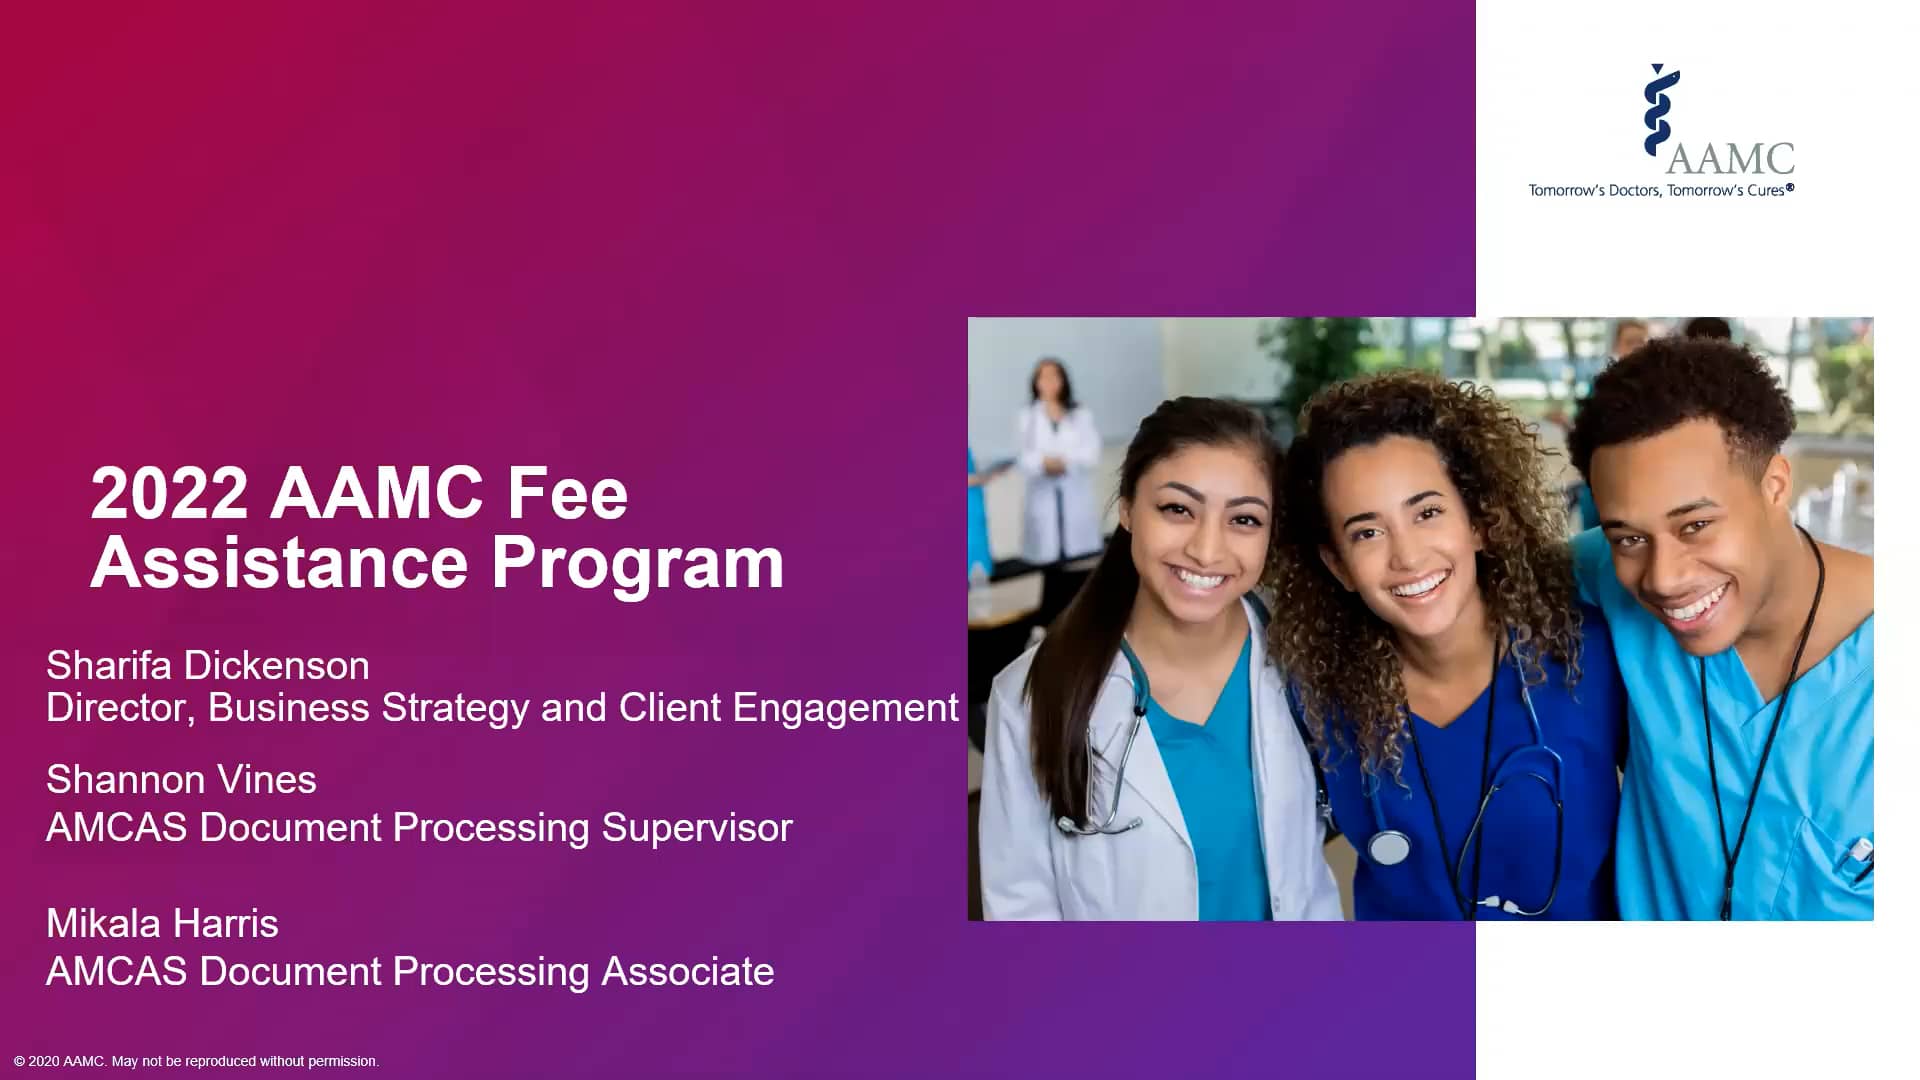 Learn about the new 2022 AAMC Fee Assistance Program on Vimeo